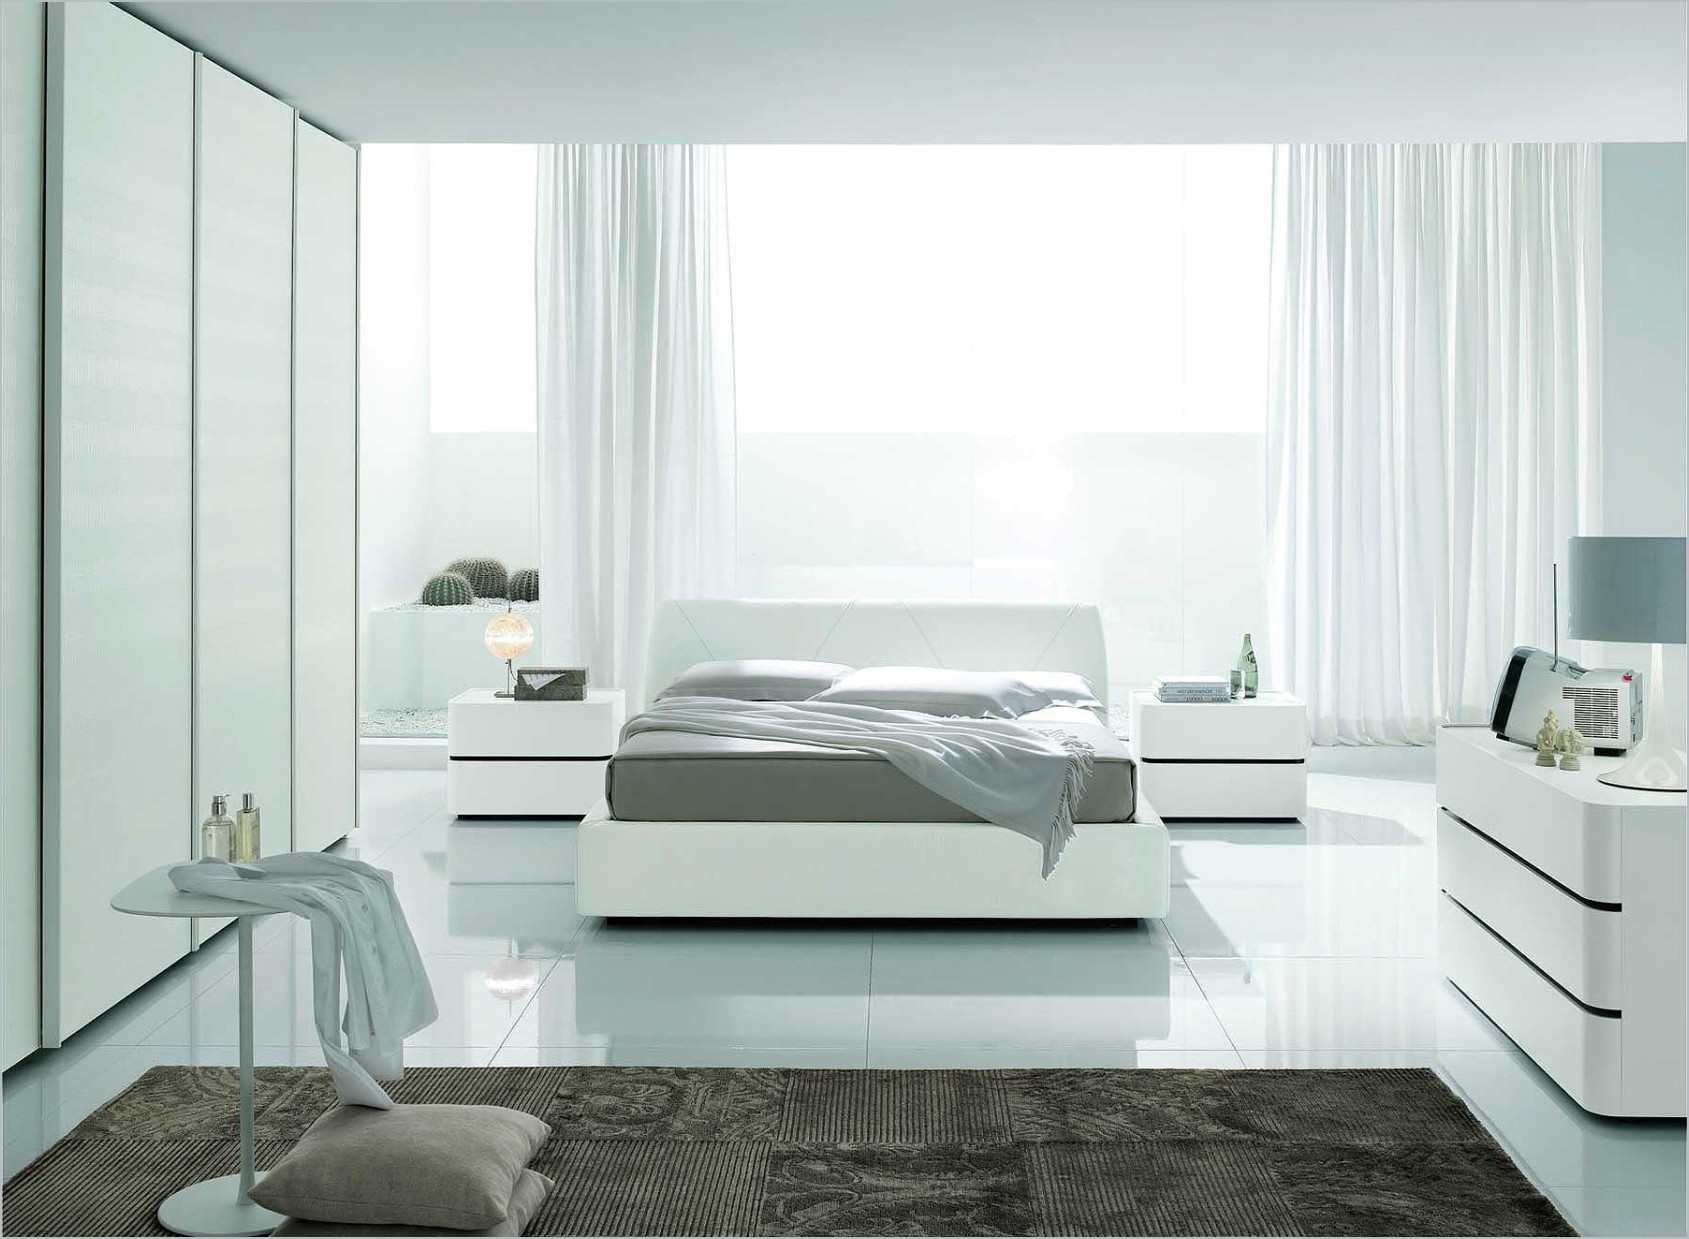 Design Tips To Create Your Most Luxurious Bedroom - Haute Residence